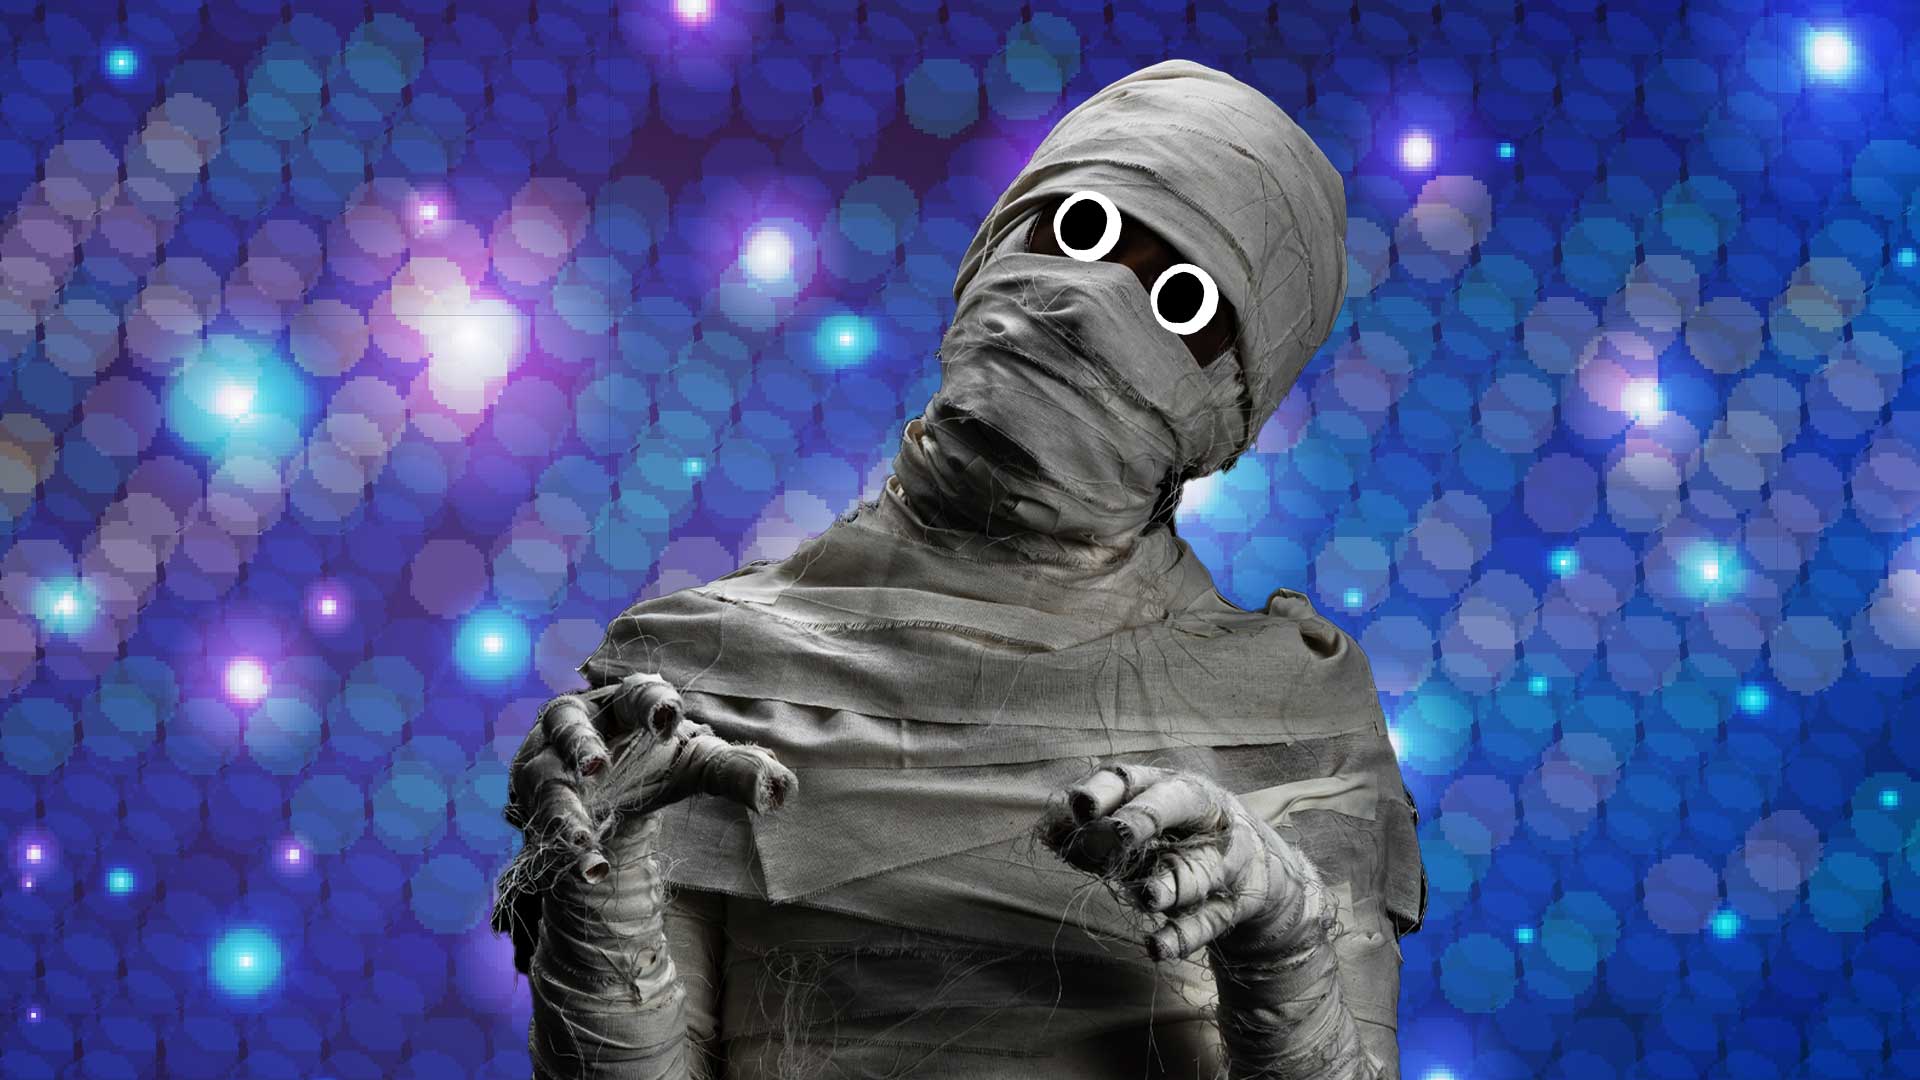 A mummy at the disco